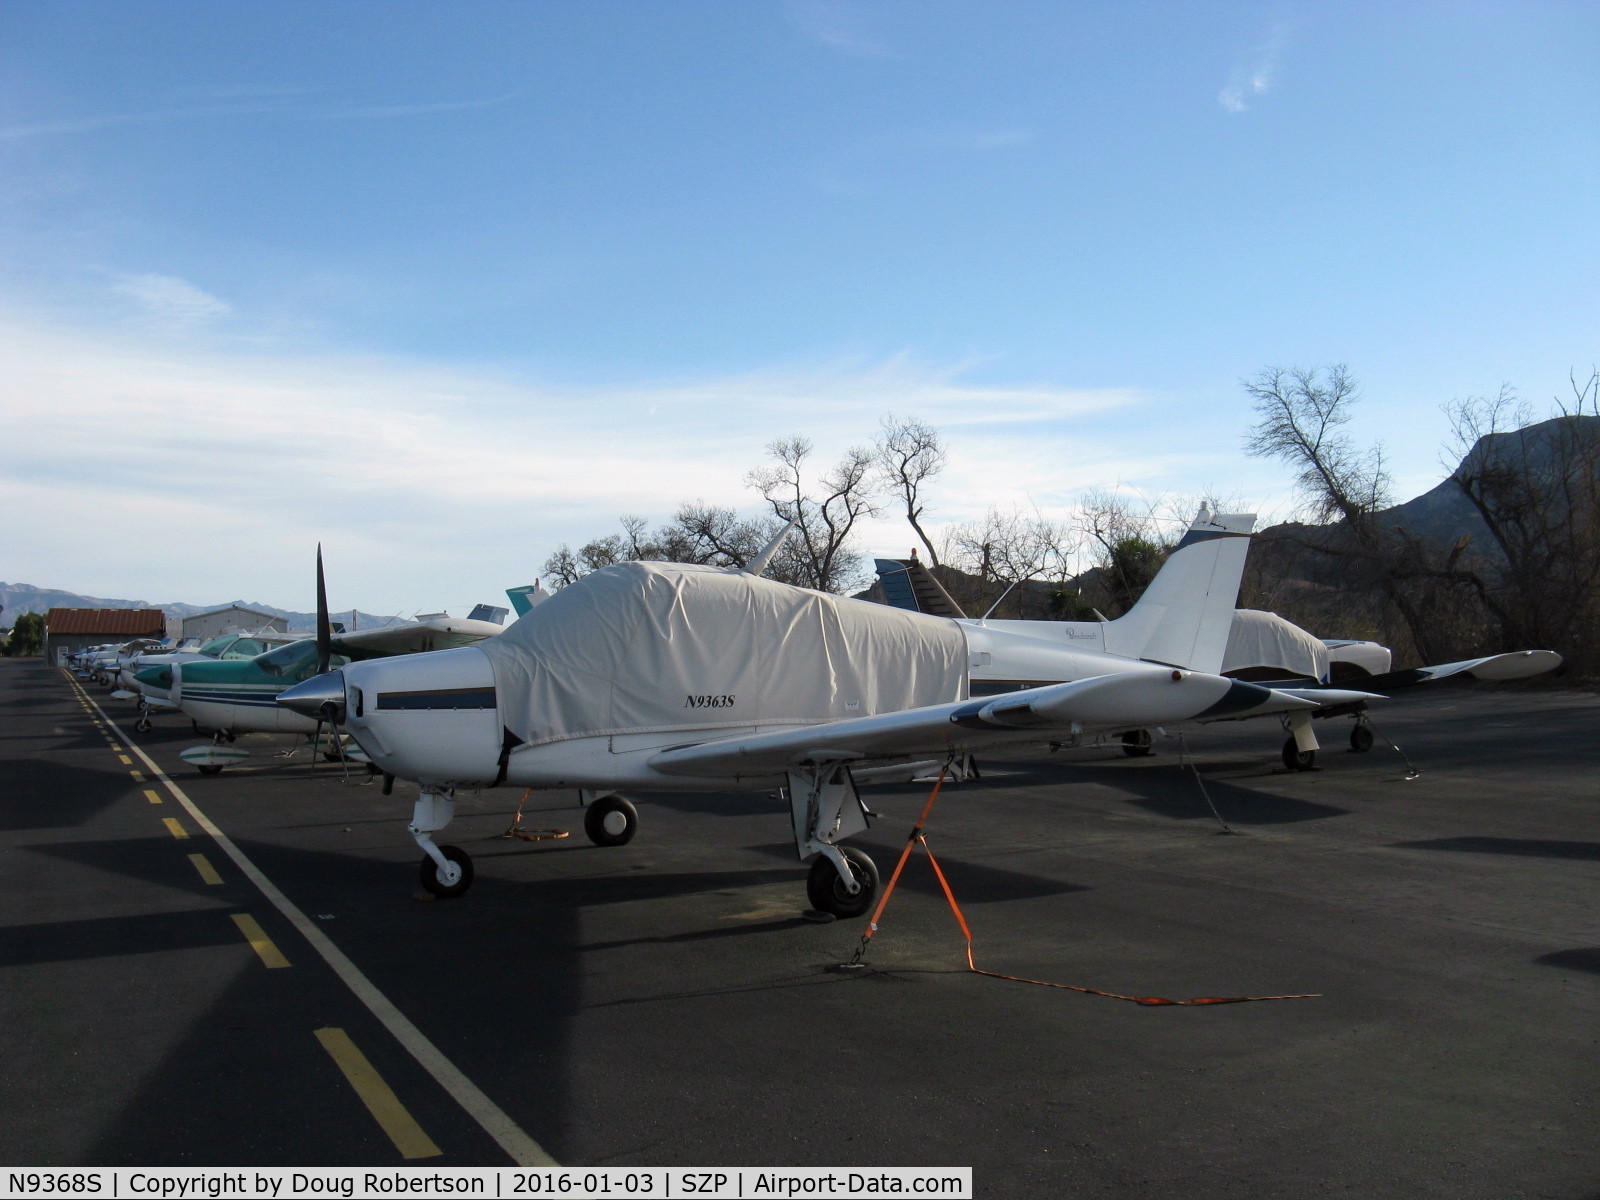 N9368S, 1975 Beech C23 Sundowner 180 C/N M-1670, 1975 Beech C23 SUNDOWNER 180, Lycoming O&VO-360 180 Hp, trailing link tri-gear provides easy soft landings, a heated pitot tube was optional on left wing on this model.